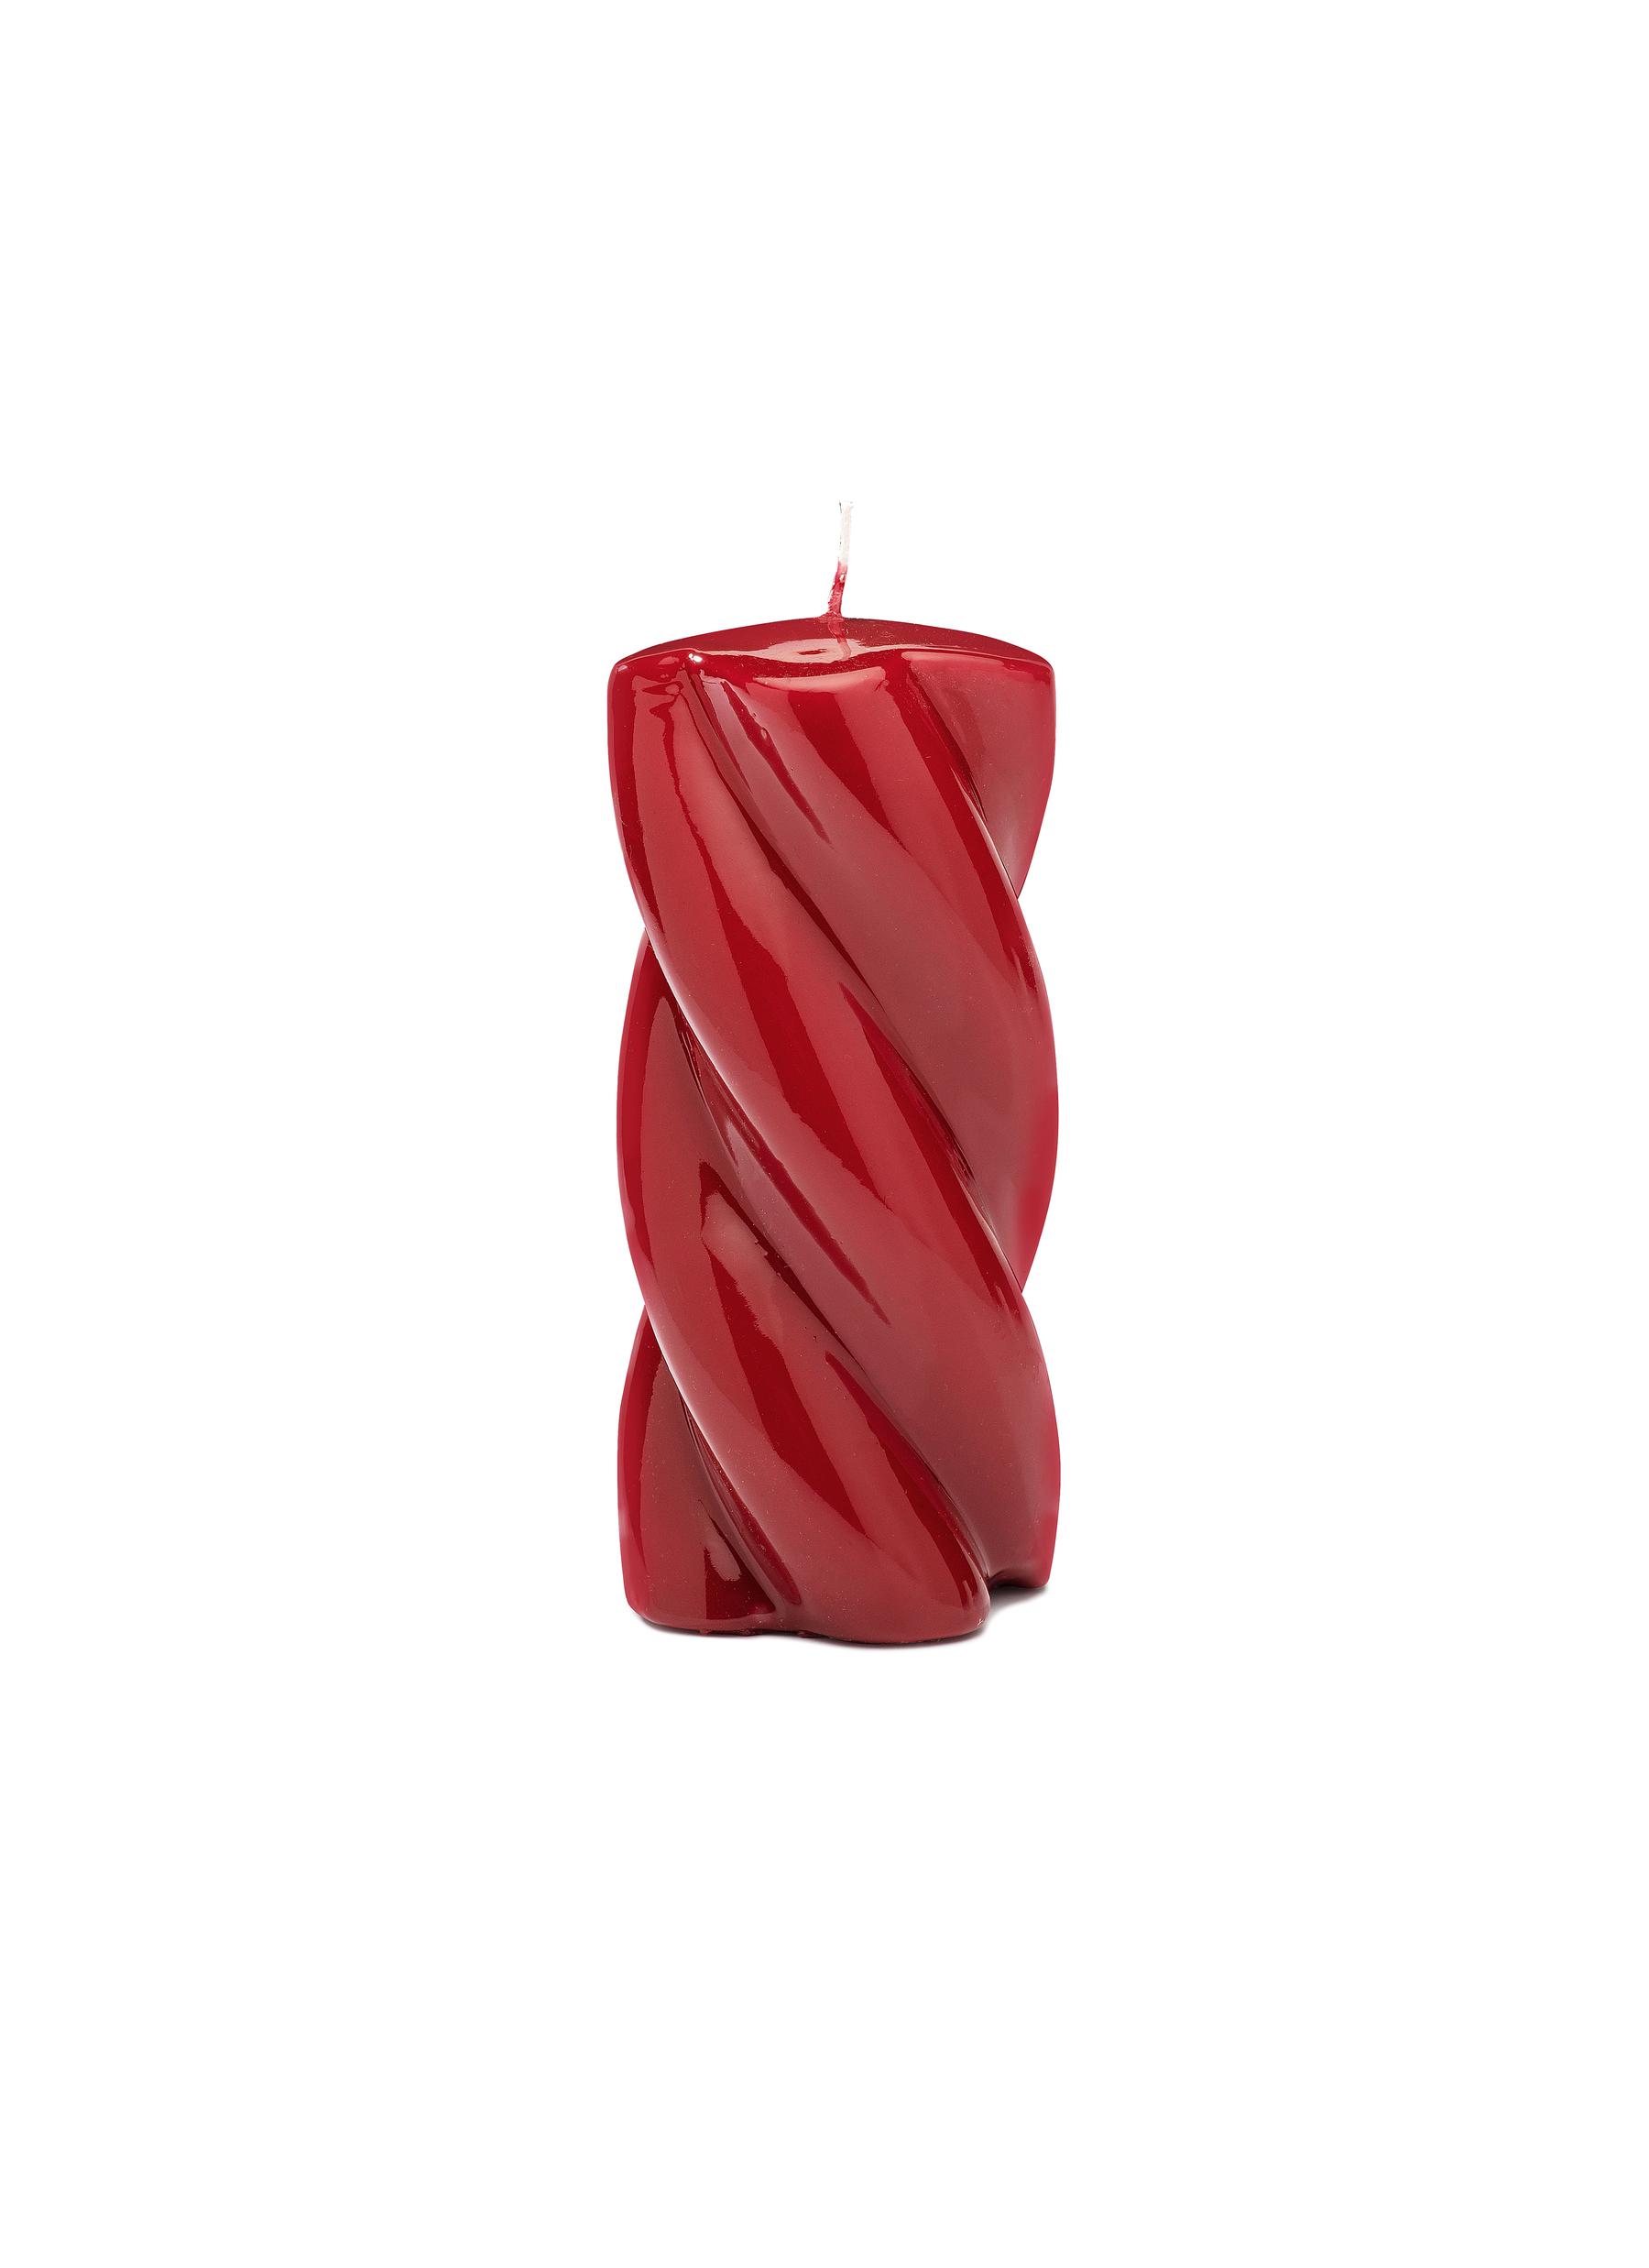 Anna + Nina Blunt Twisted Long Candle - Red